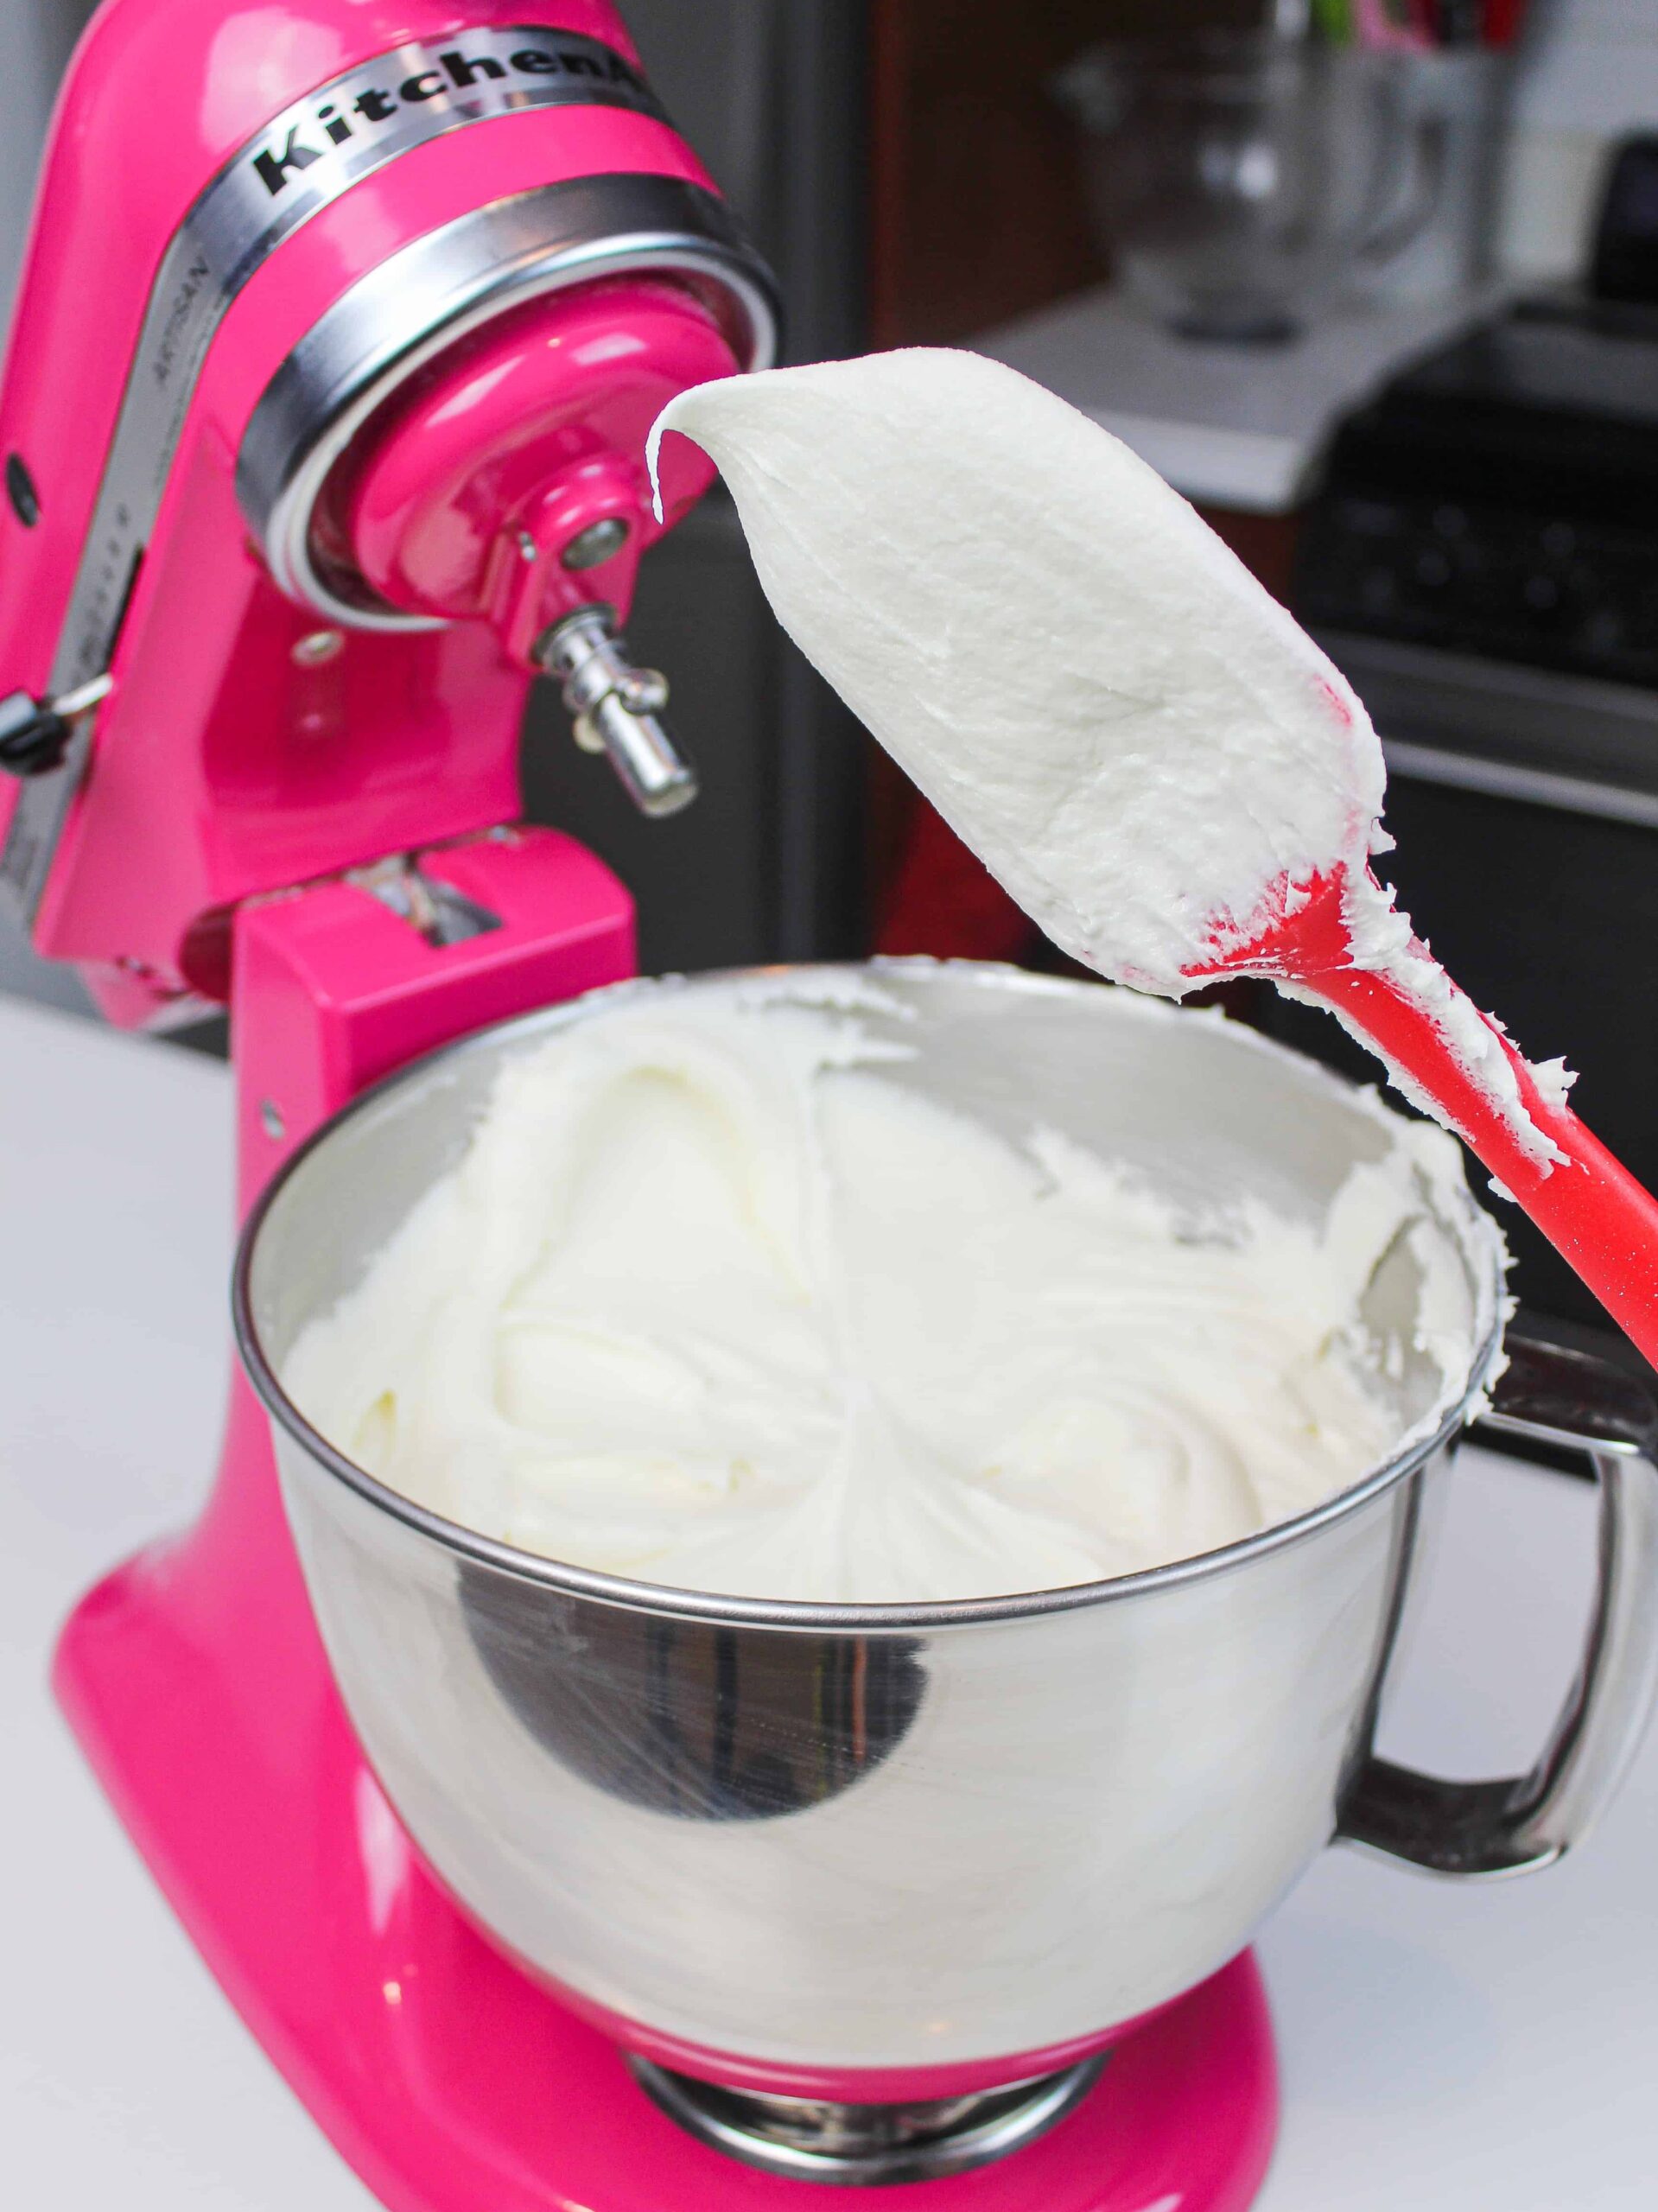 image of buttercream frosting being tested for the right consistency